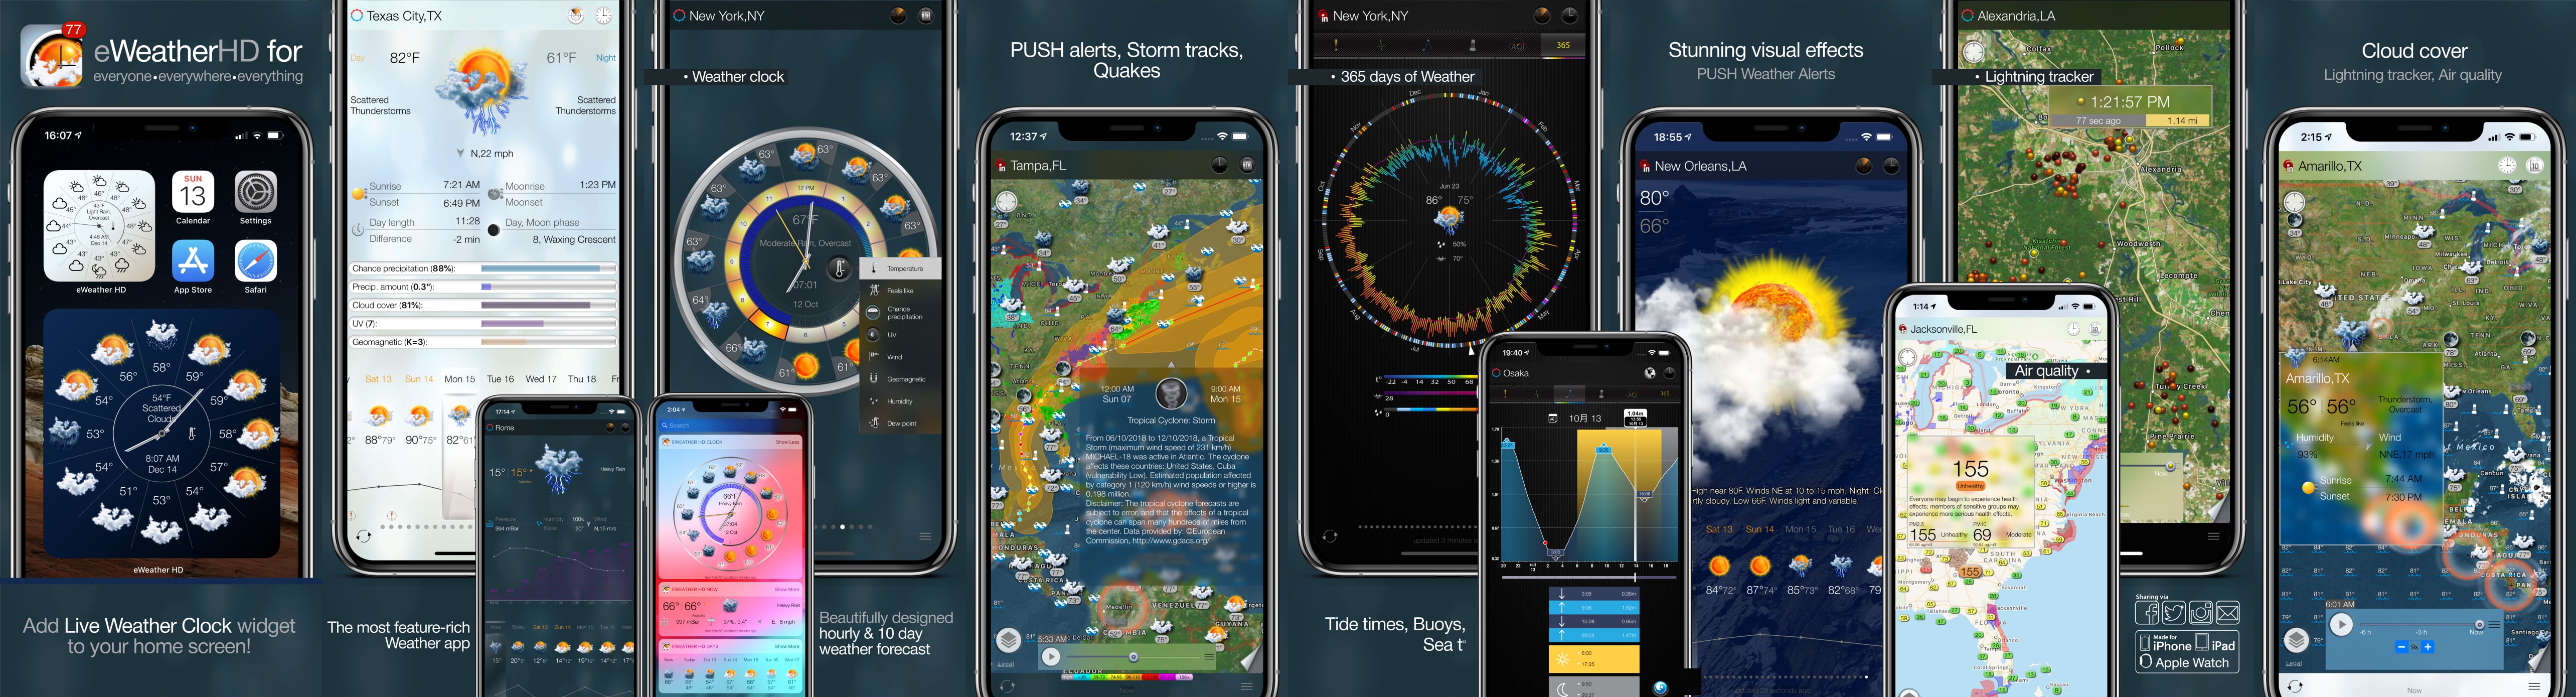 eWeather HD 3.12 for  Apple Watch- Severe weather alerts PUSH notifications, weather forecast, wind, rain, snow, temperature of air, humidity, dew-point, uv-index, geomagnetic activity and more